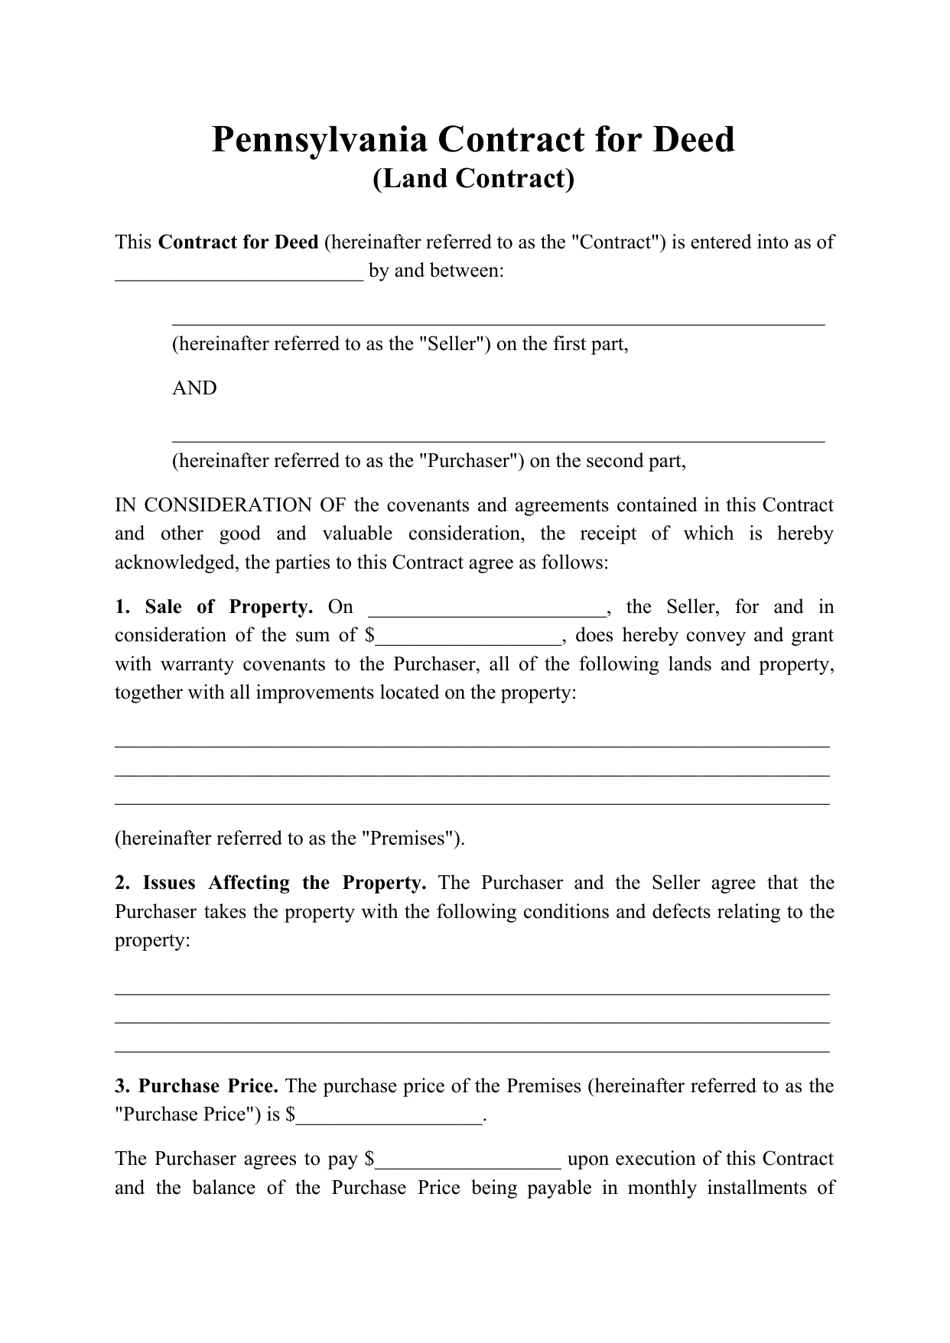 Contract for Deed (Land Contract) - Pennsylvania, Page 1